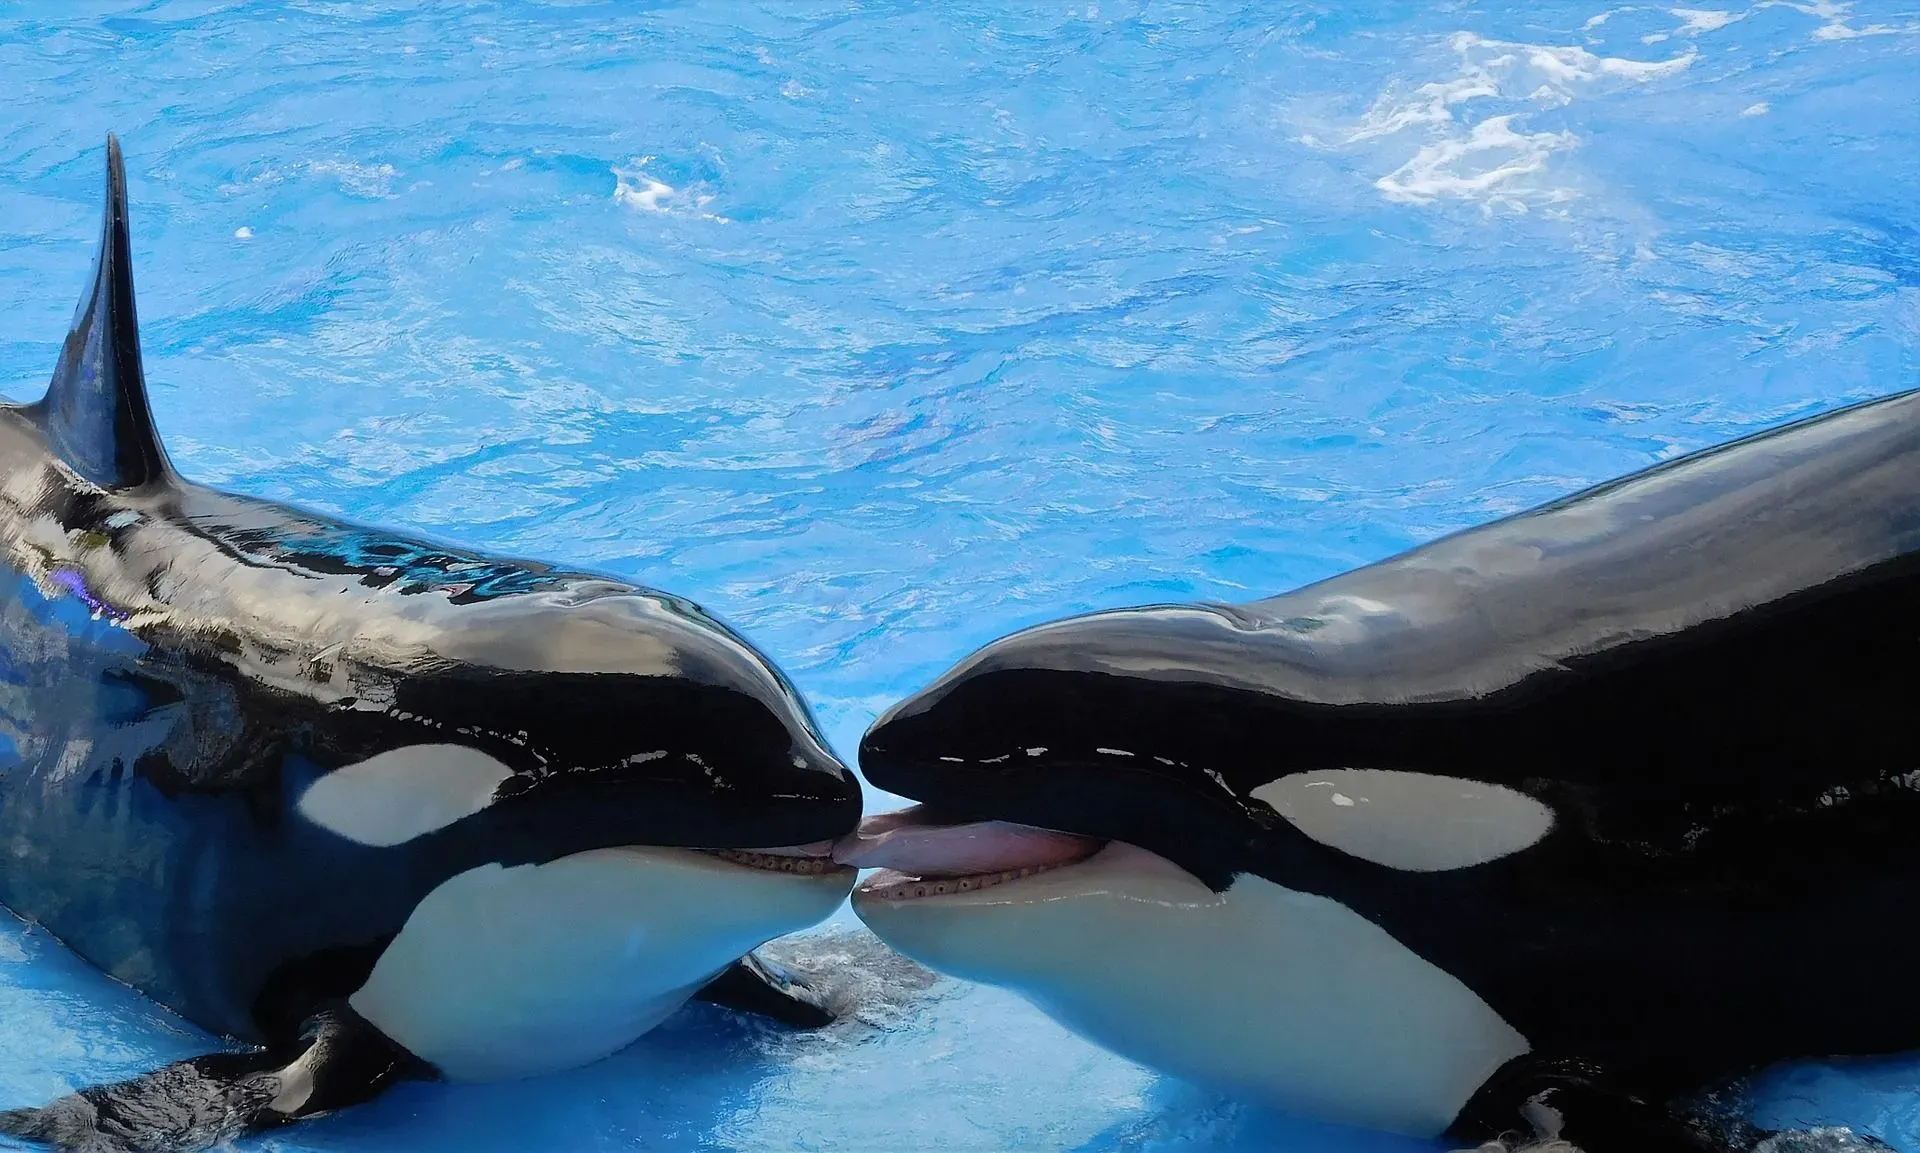 Killer whale eyes are located on each side of the head.